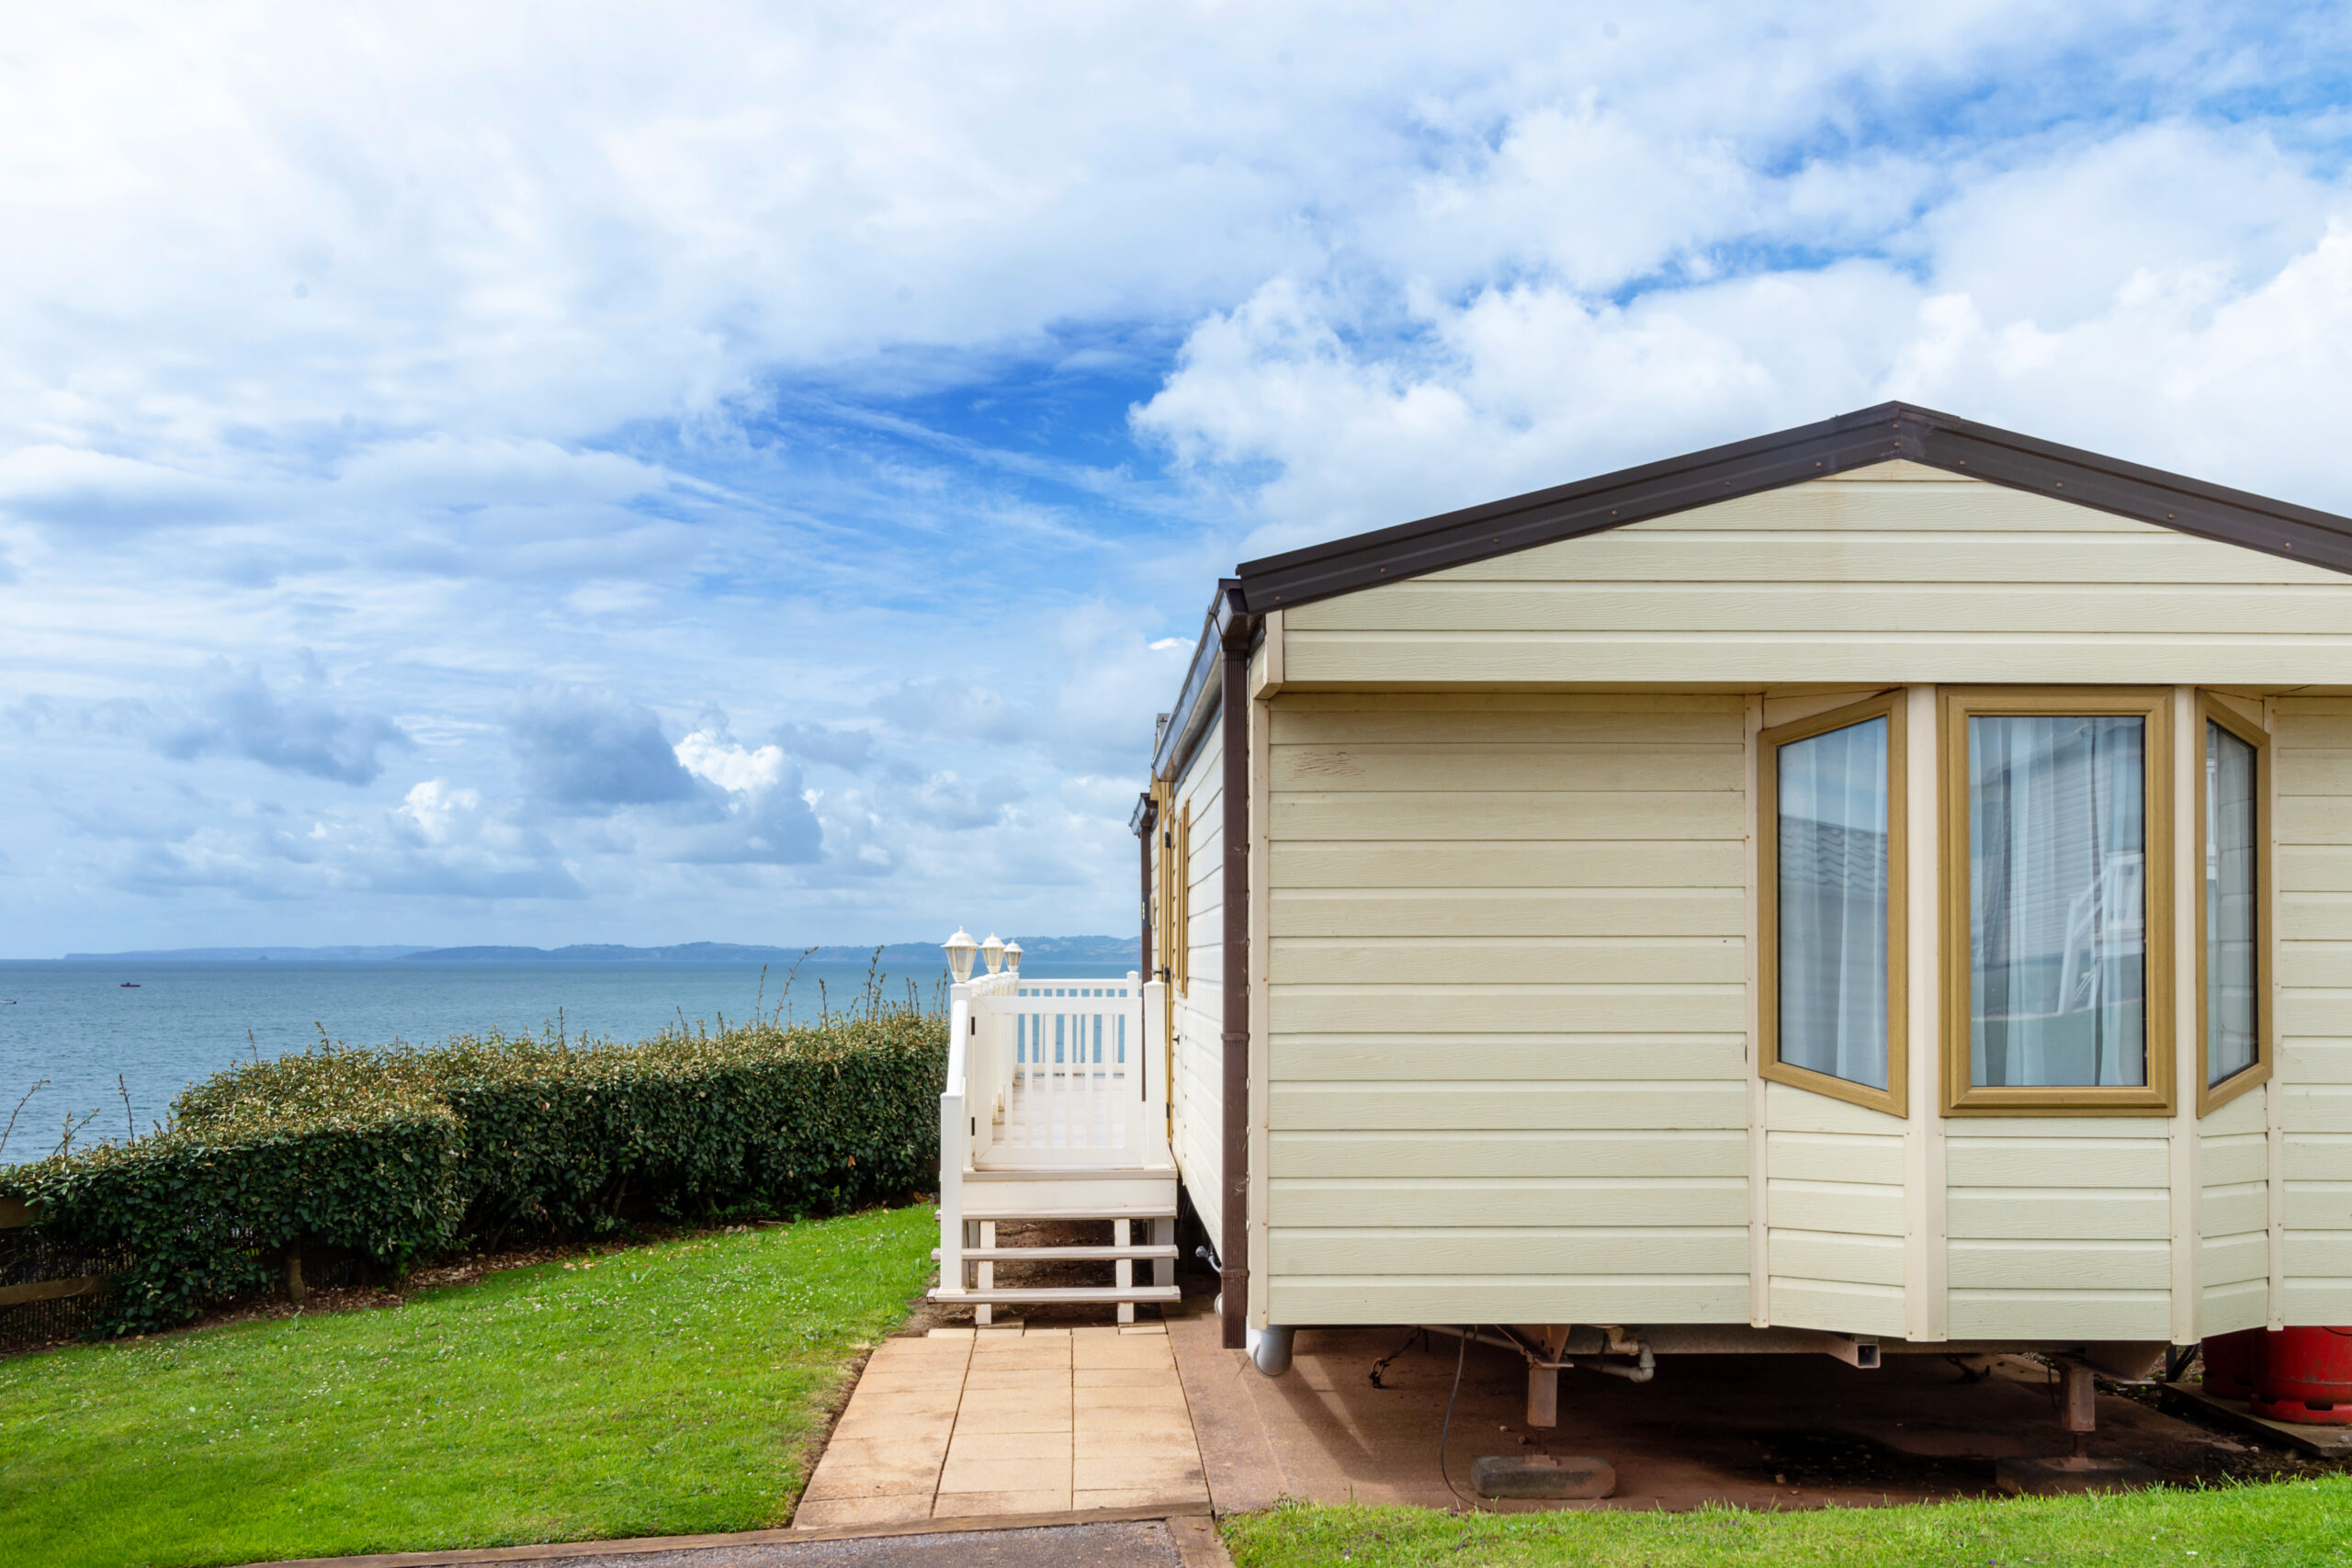 Image for Mobile Home Insurance